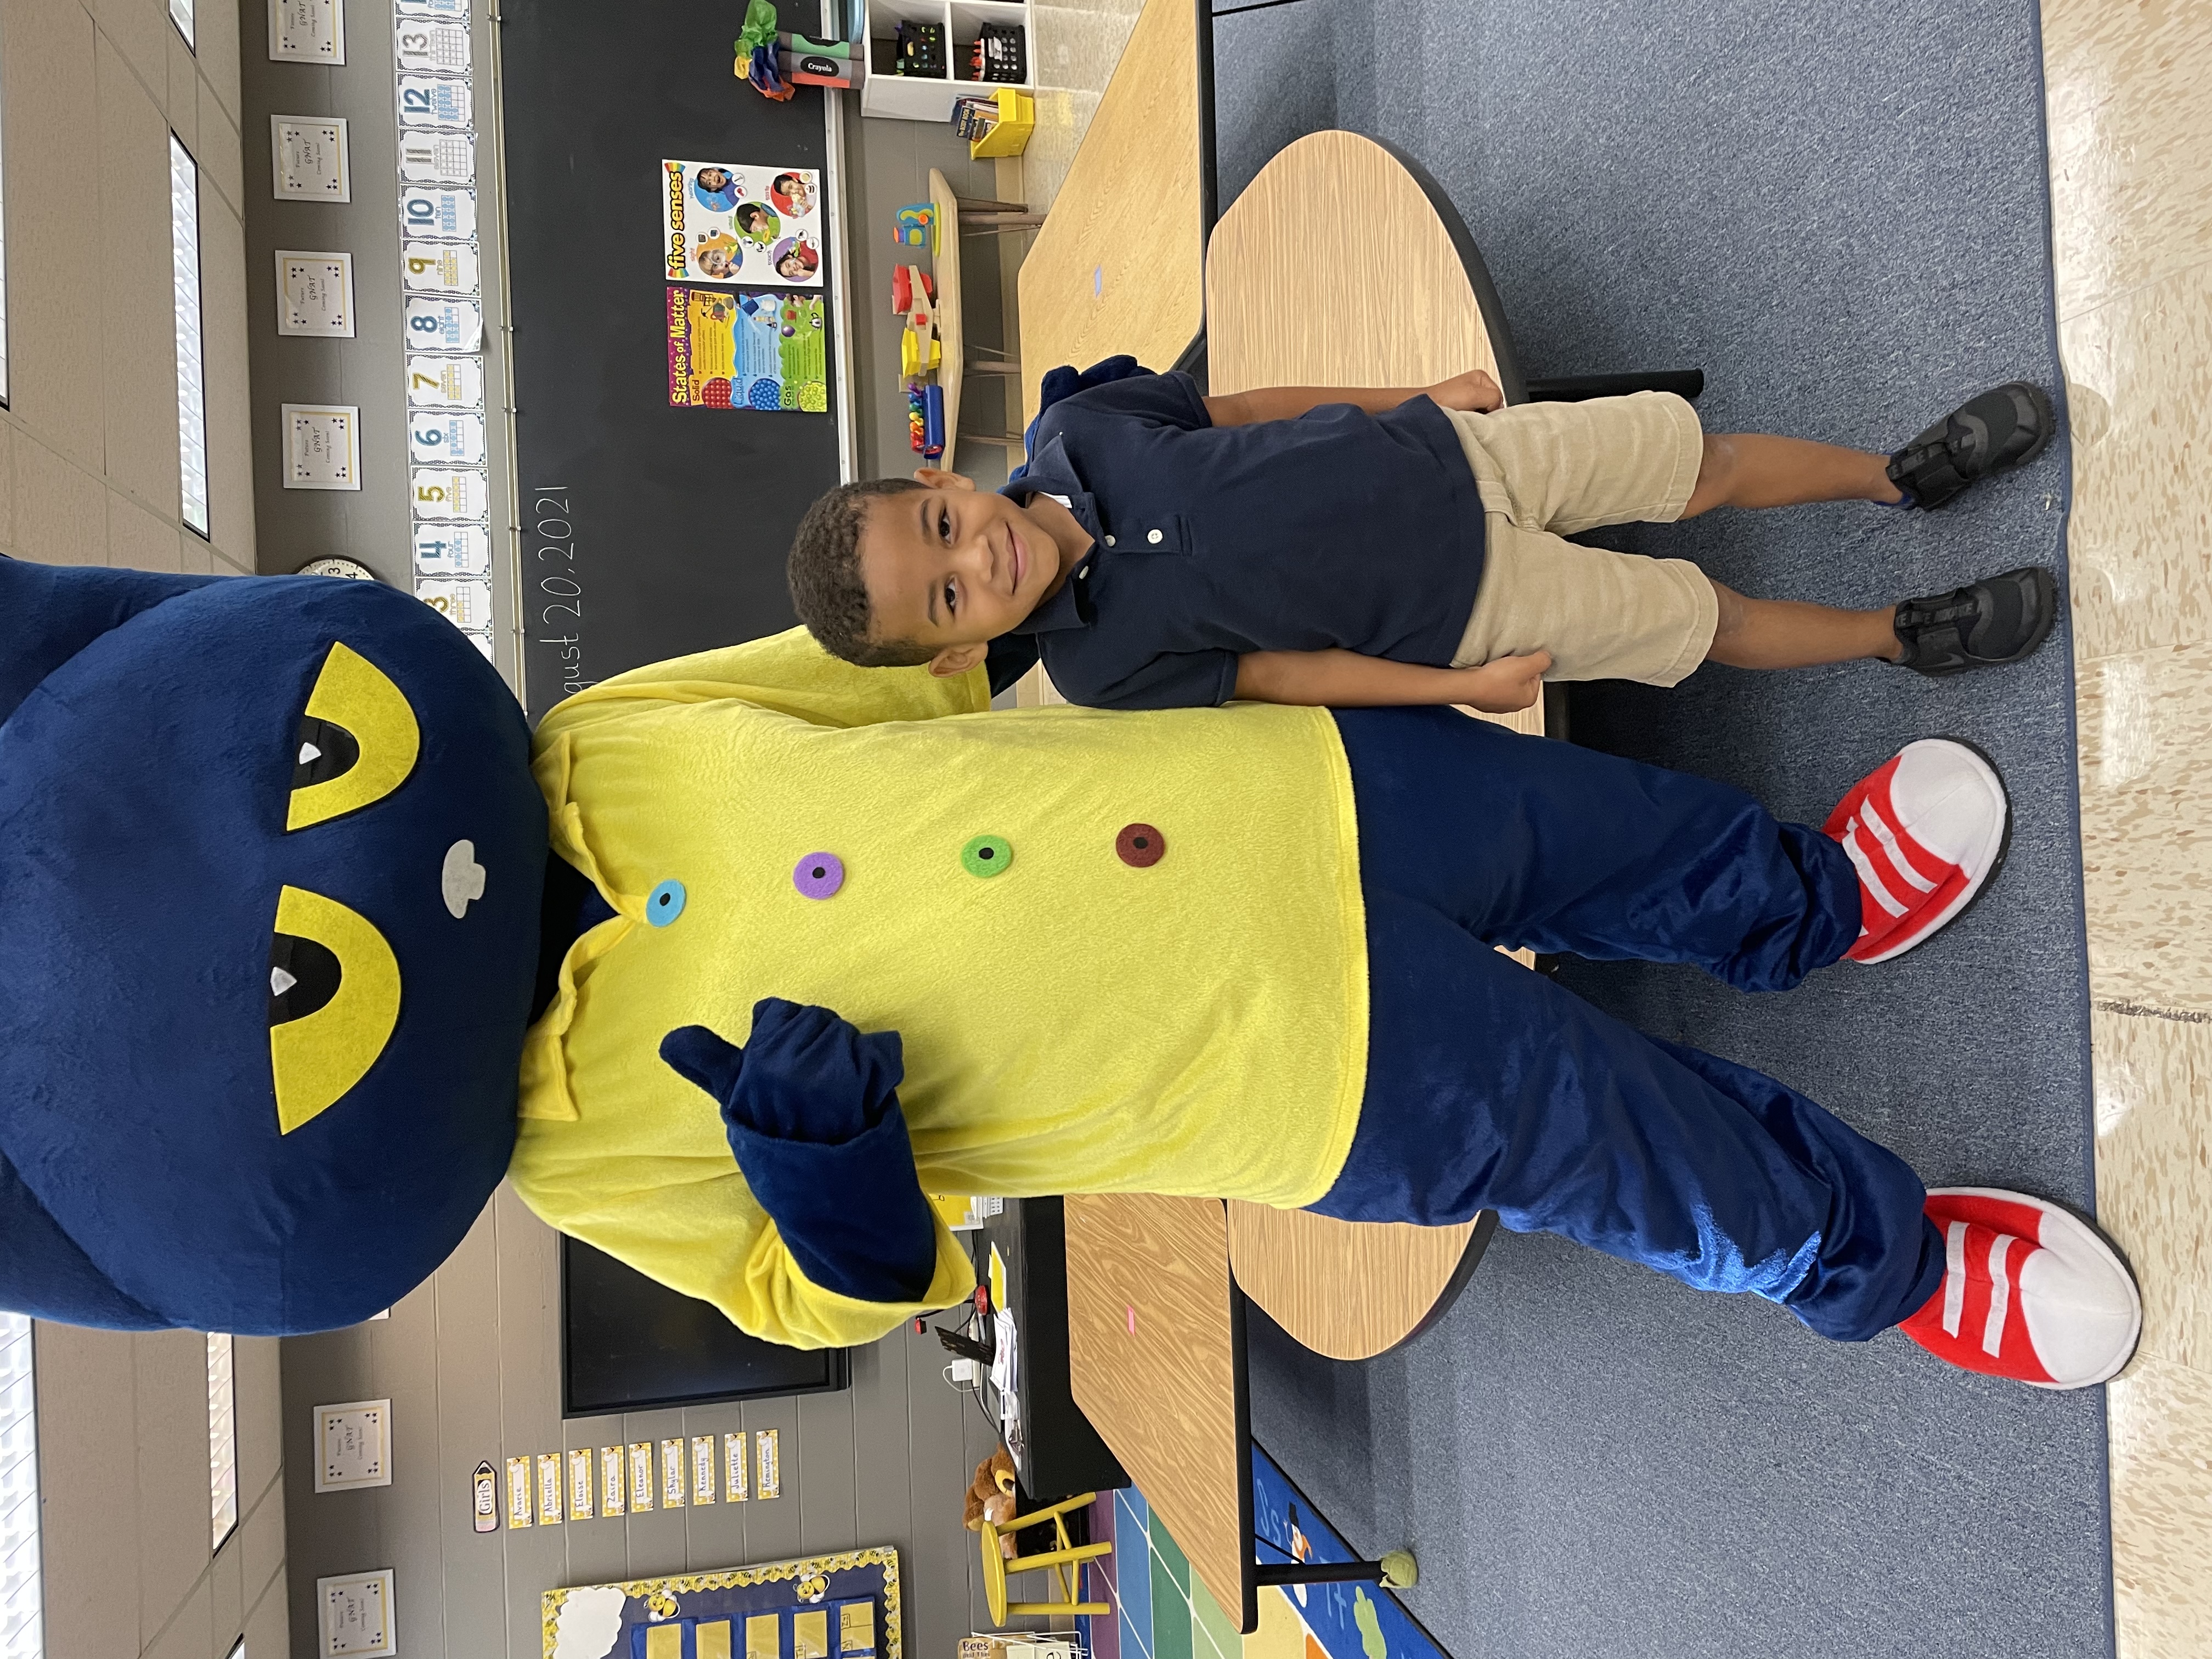 Pete the Cat visiting with a Kindergarten Gnat.